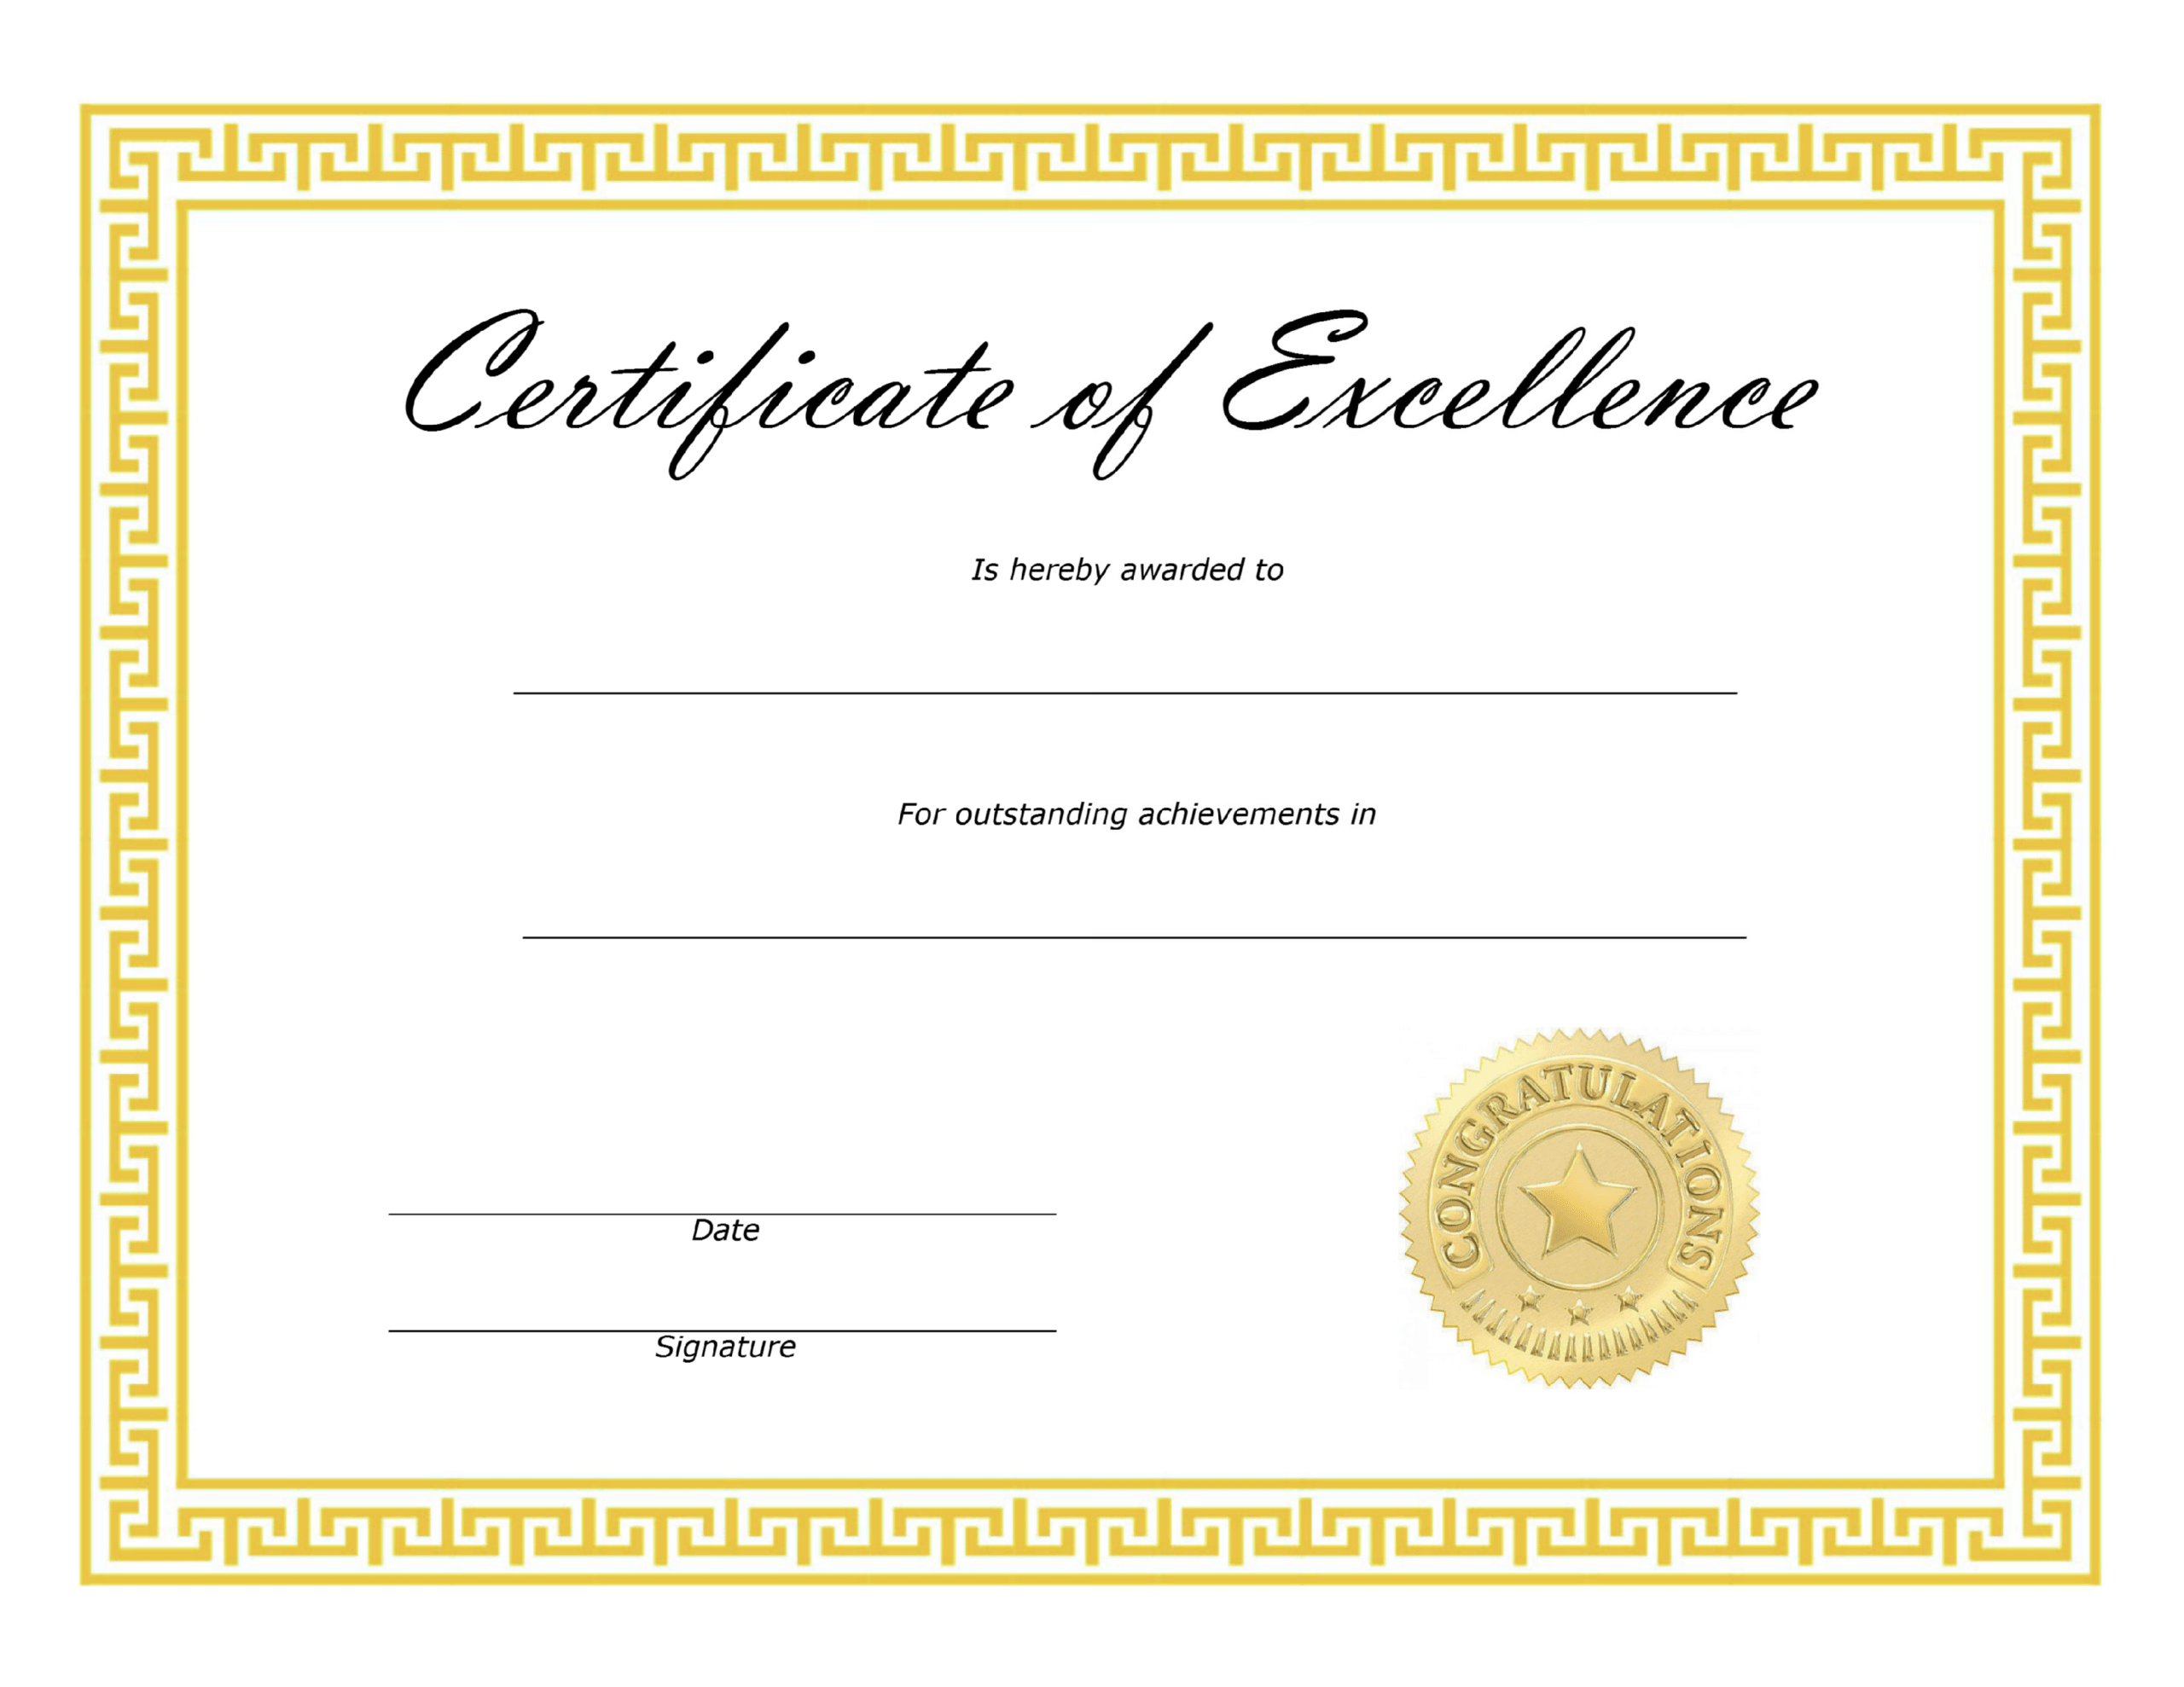 ❤️ Free Sample Certificate Of Excellence Templates❤️ Within Certificate Of Excellence Template Free Download